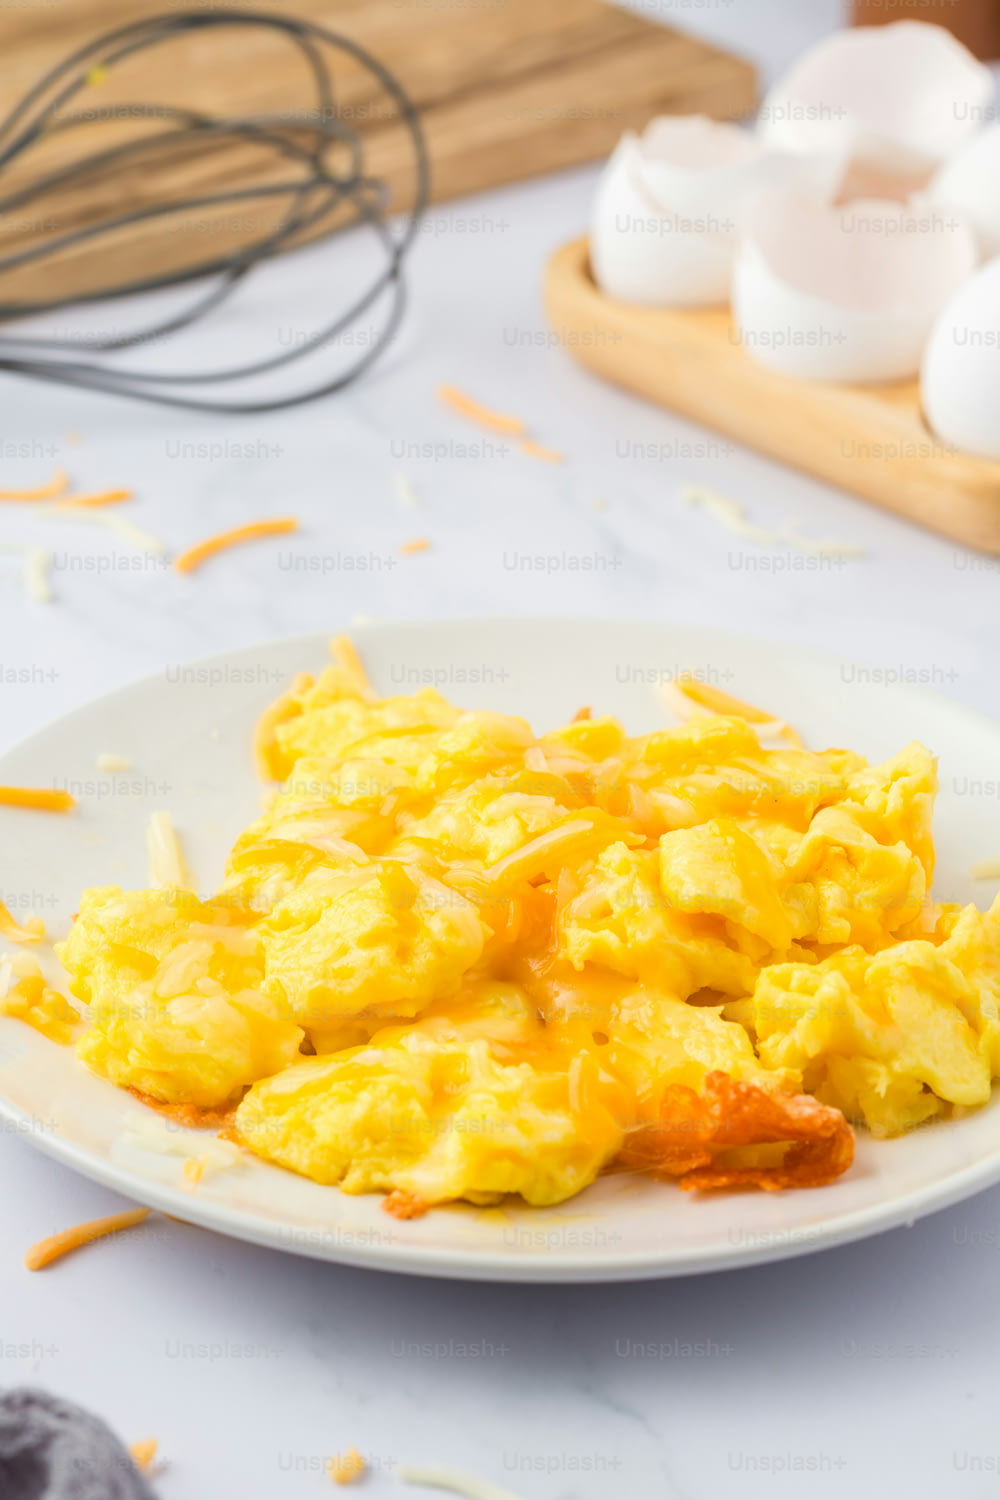 a plate of scrambled eggs on a table